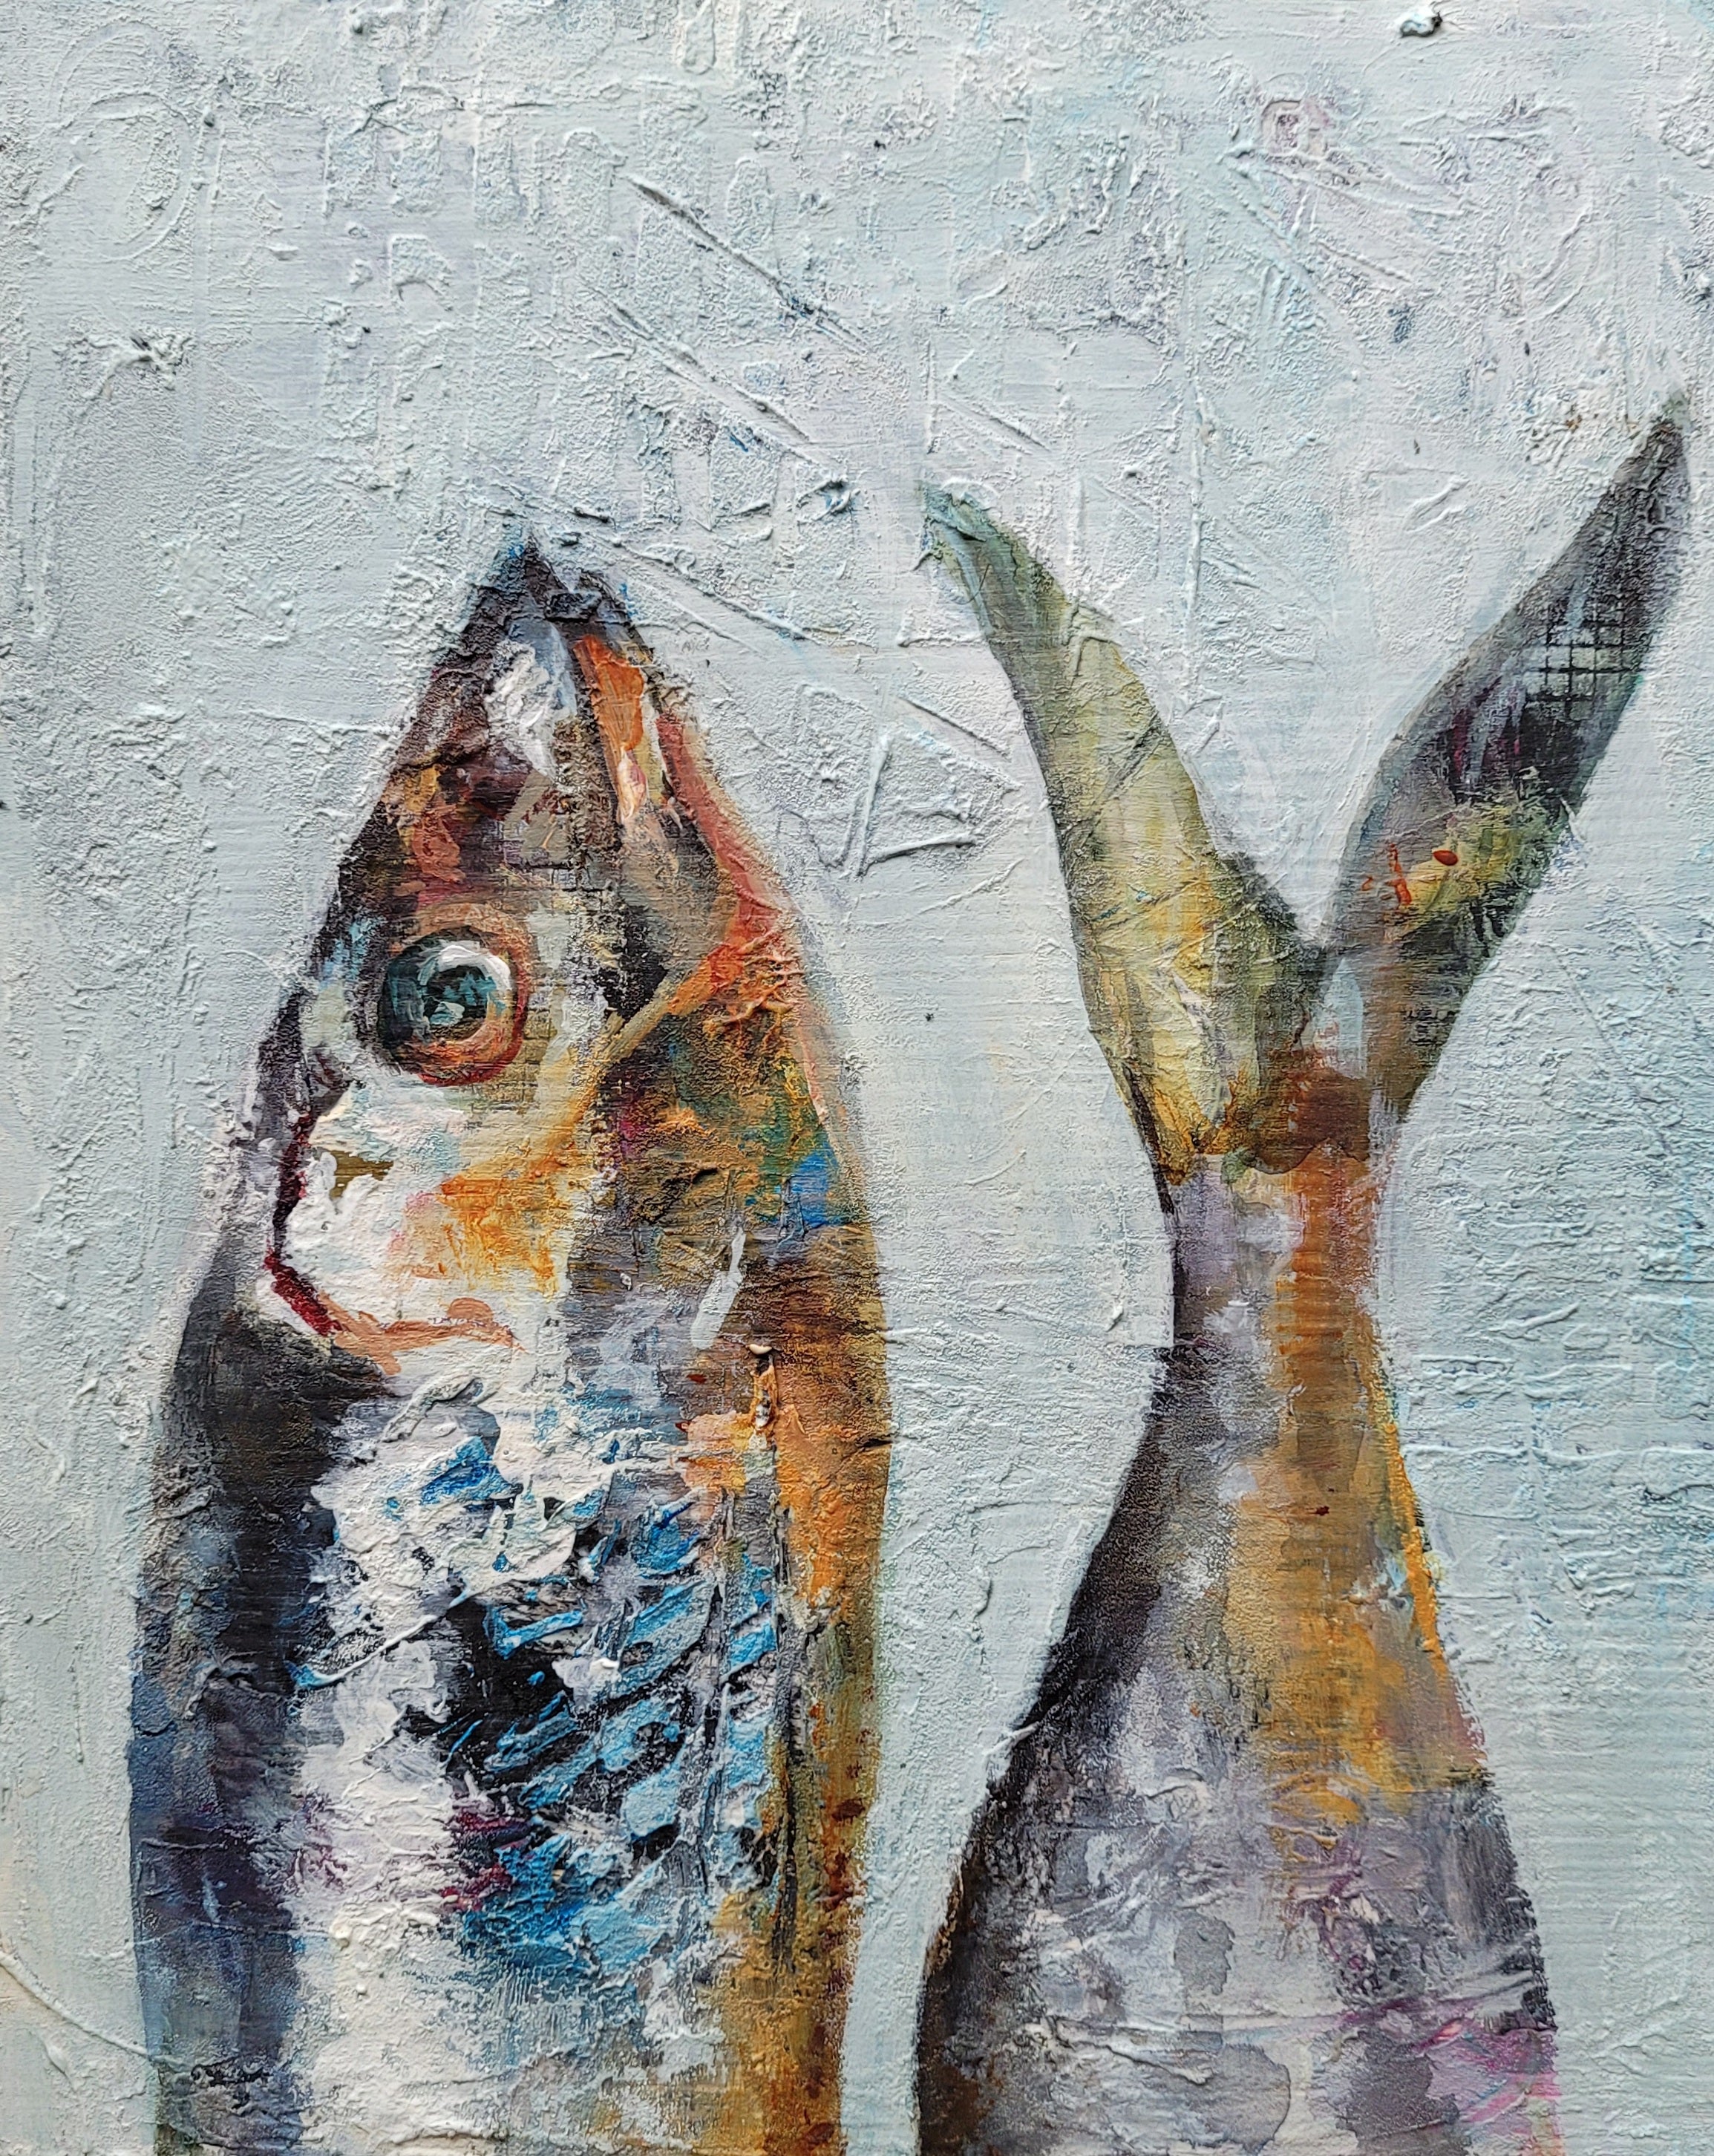 Mixed Media Fish Painting In Pieces #2 by Eclectic Studio